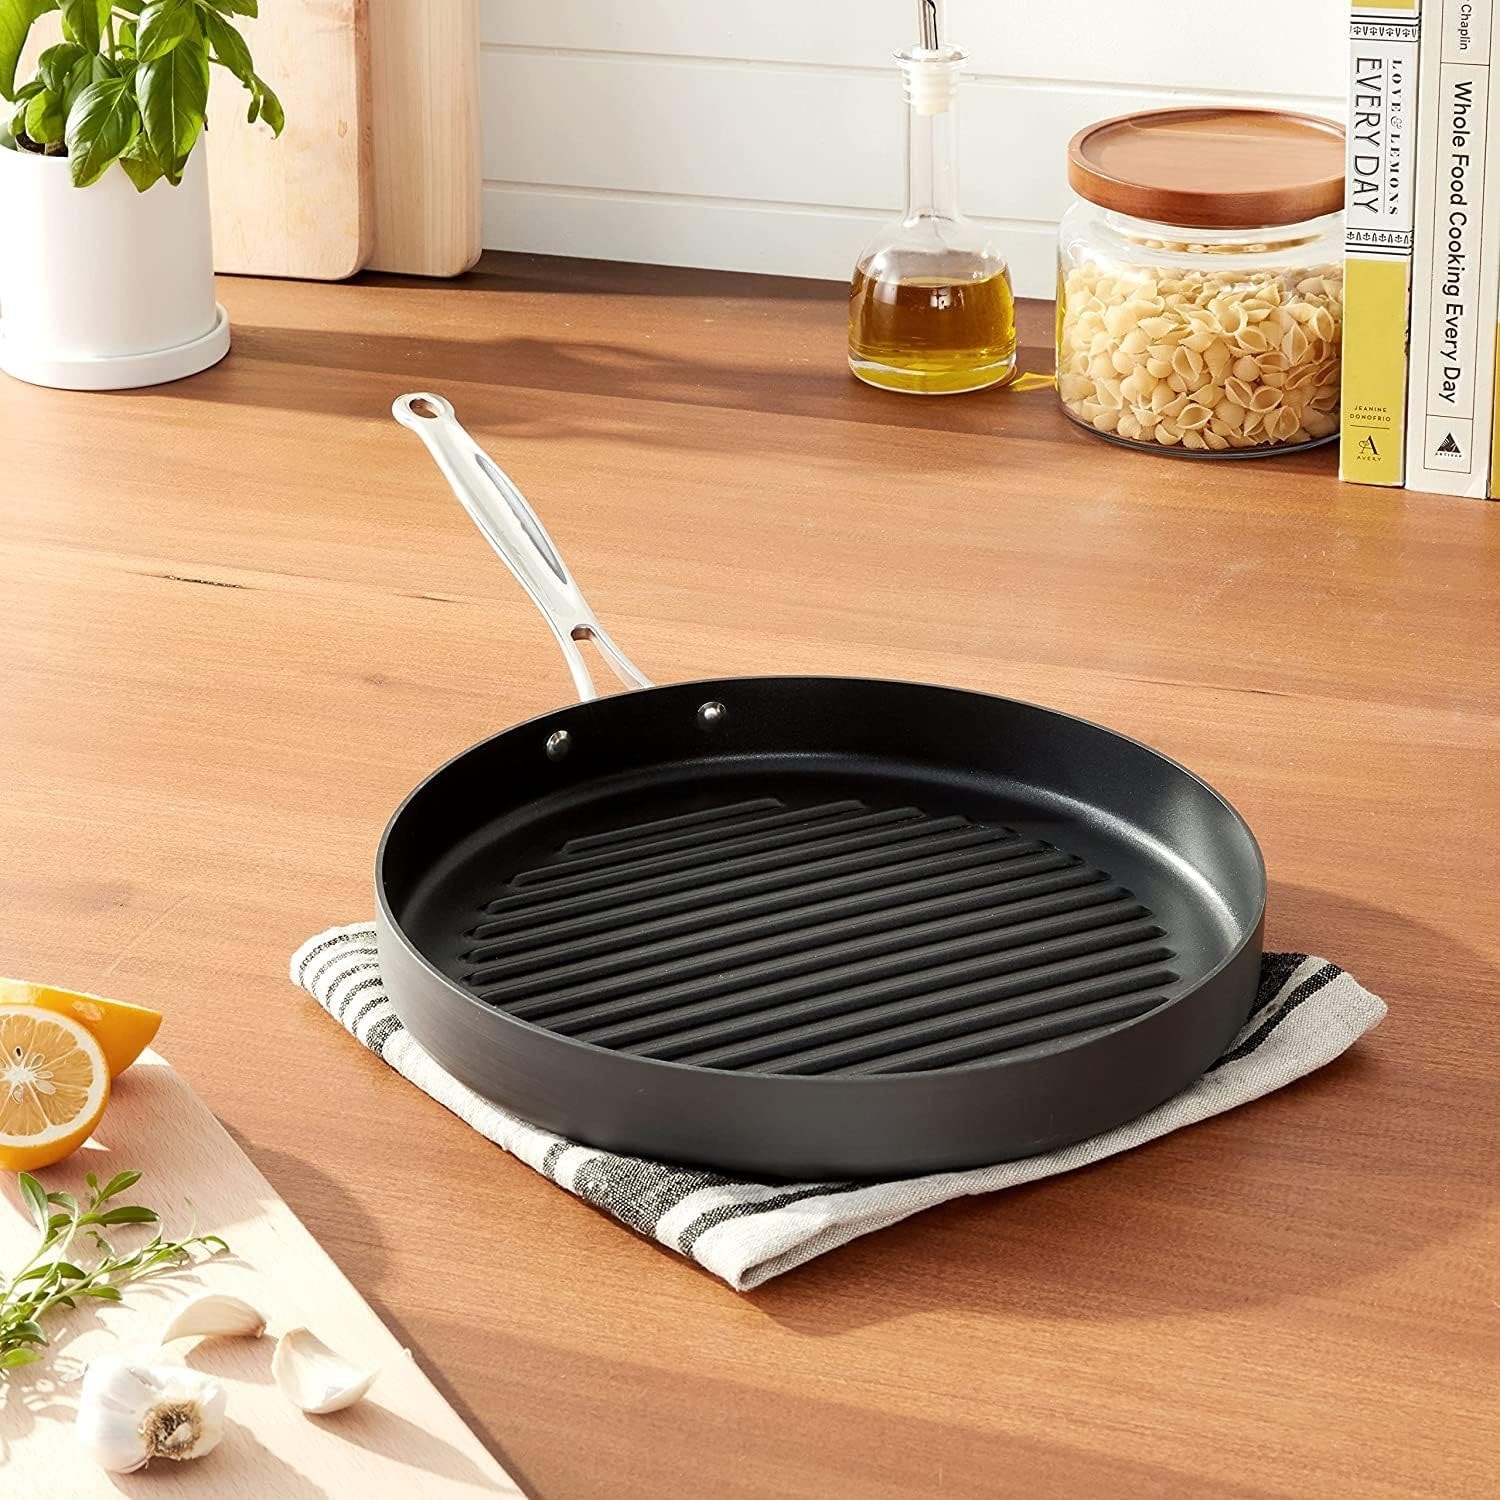  Cuisinart Hard-Anondized 12-Inch Skillet and 10-Inch